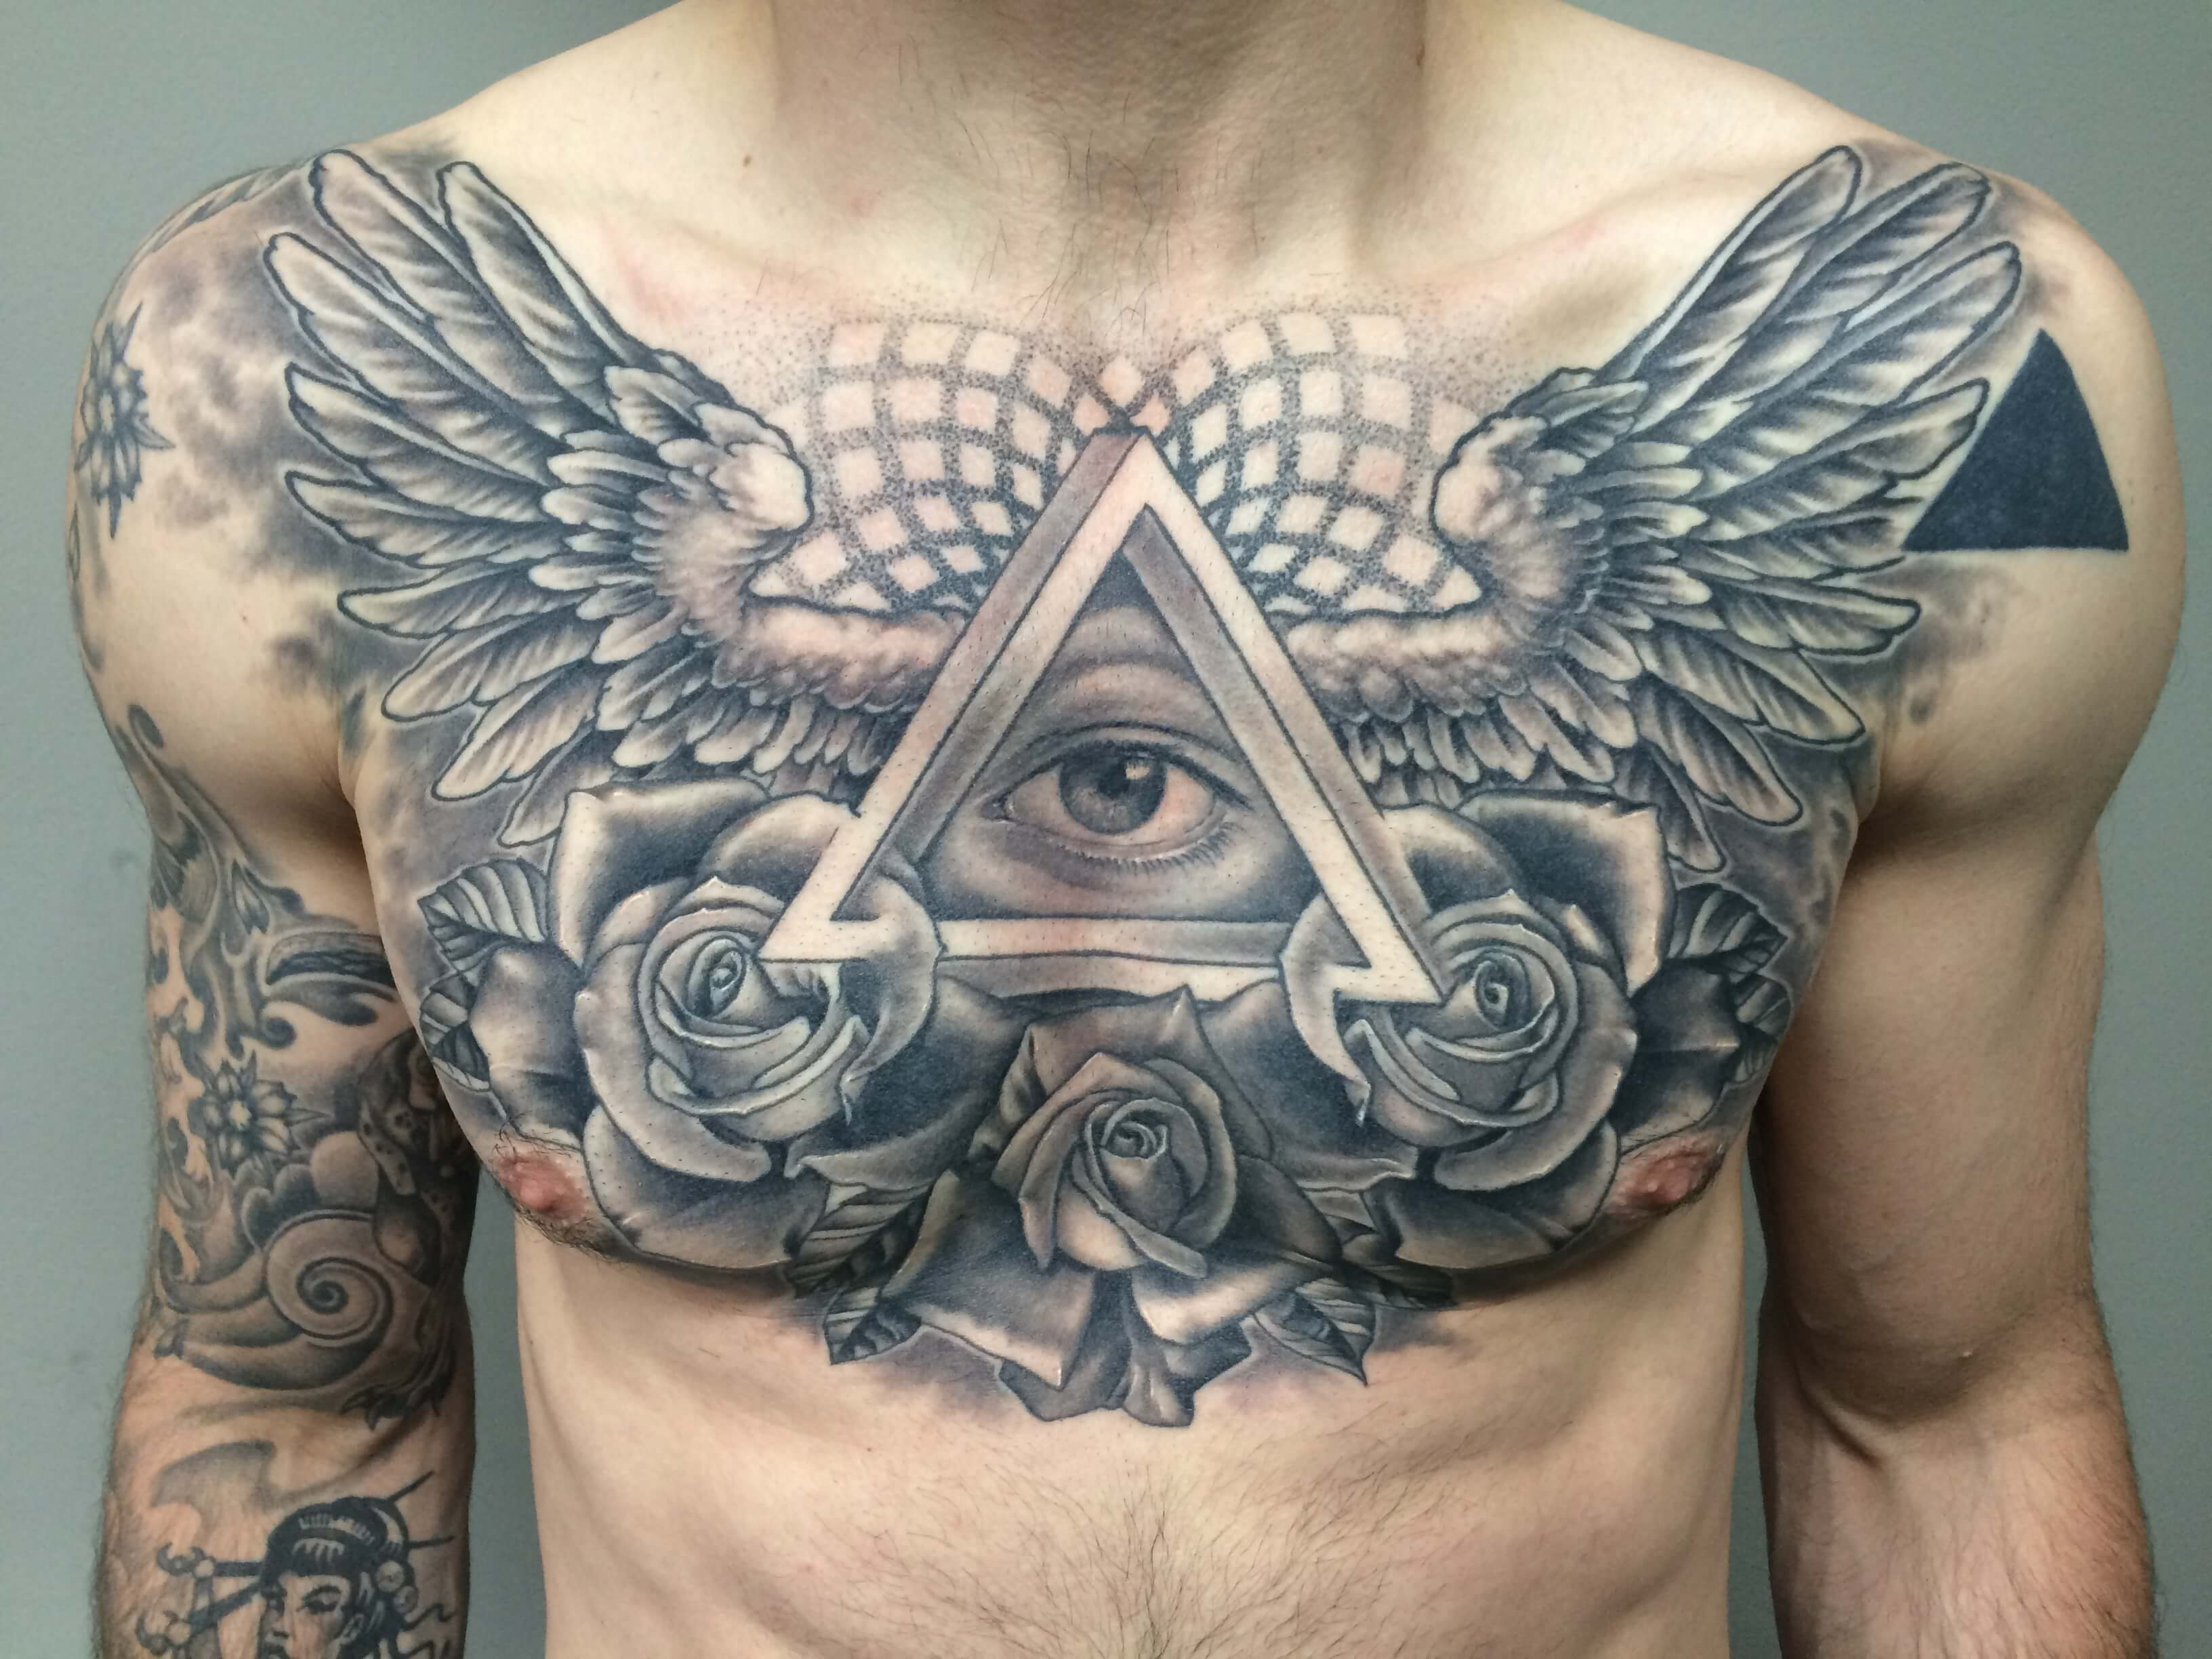 The 100 Best Chest Tattoos For Men Improb pertaining to dimensions 3264 X 2448